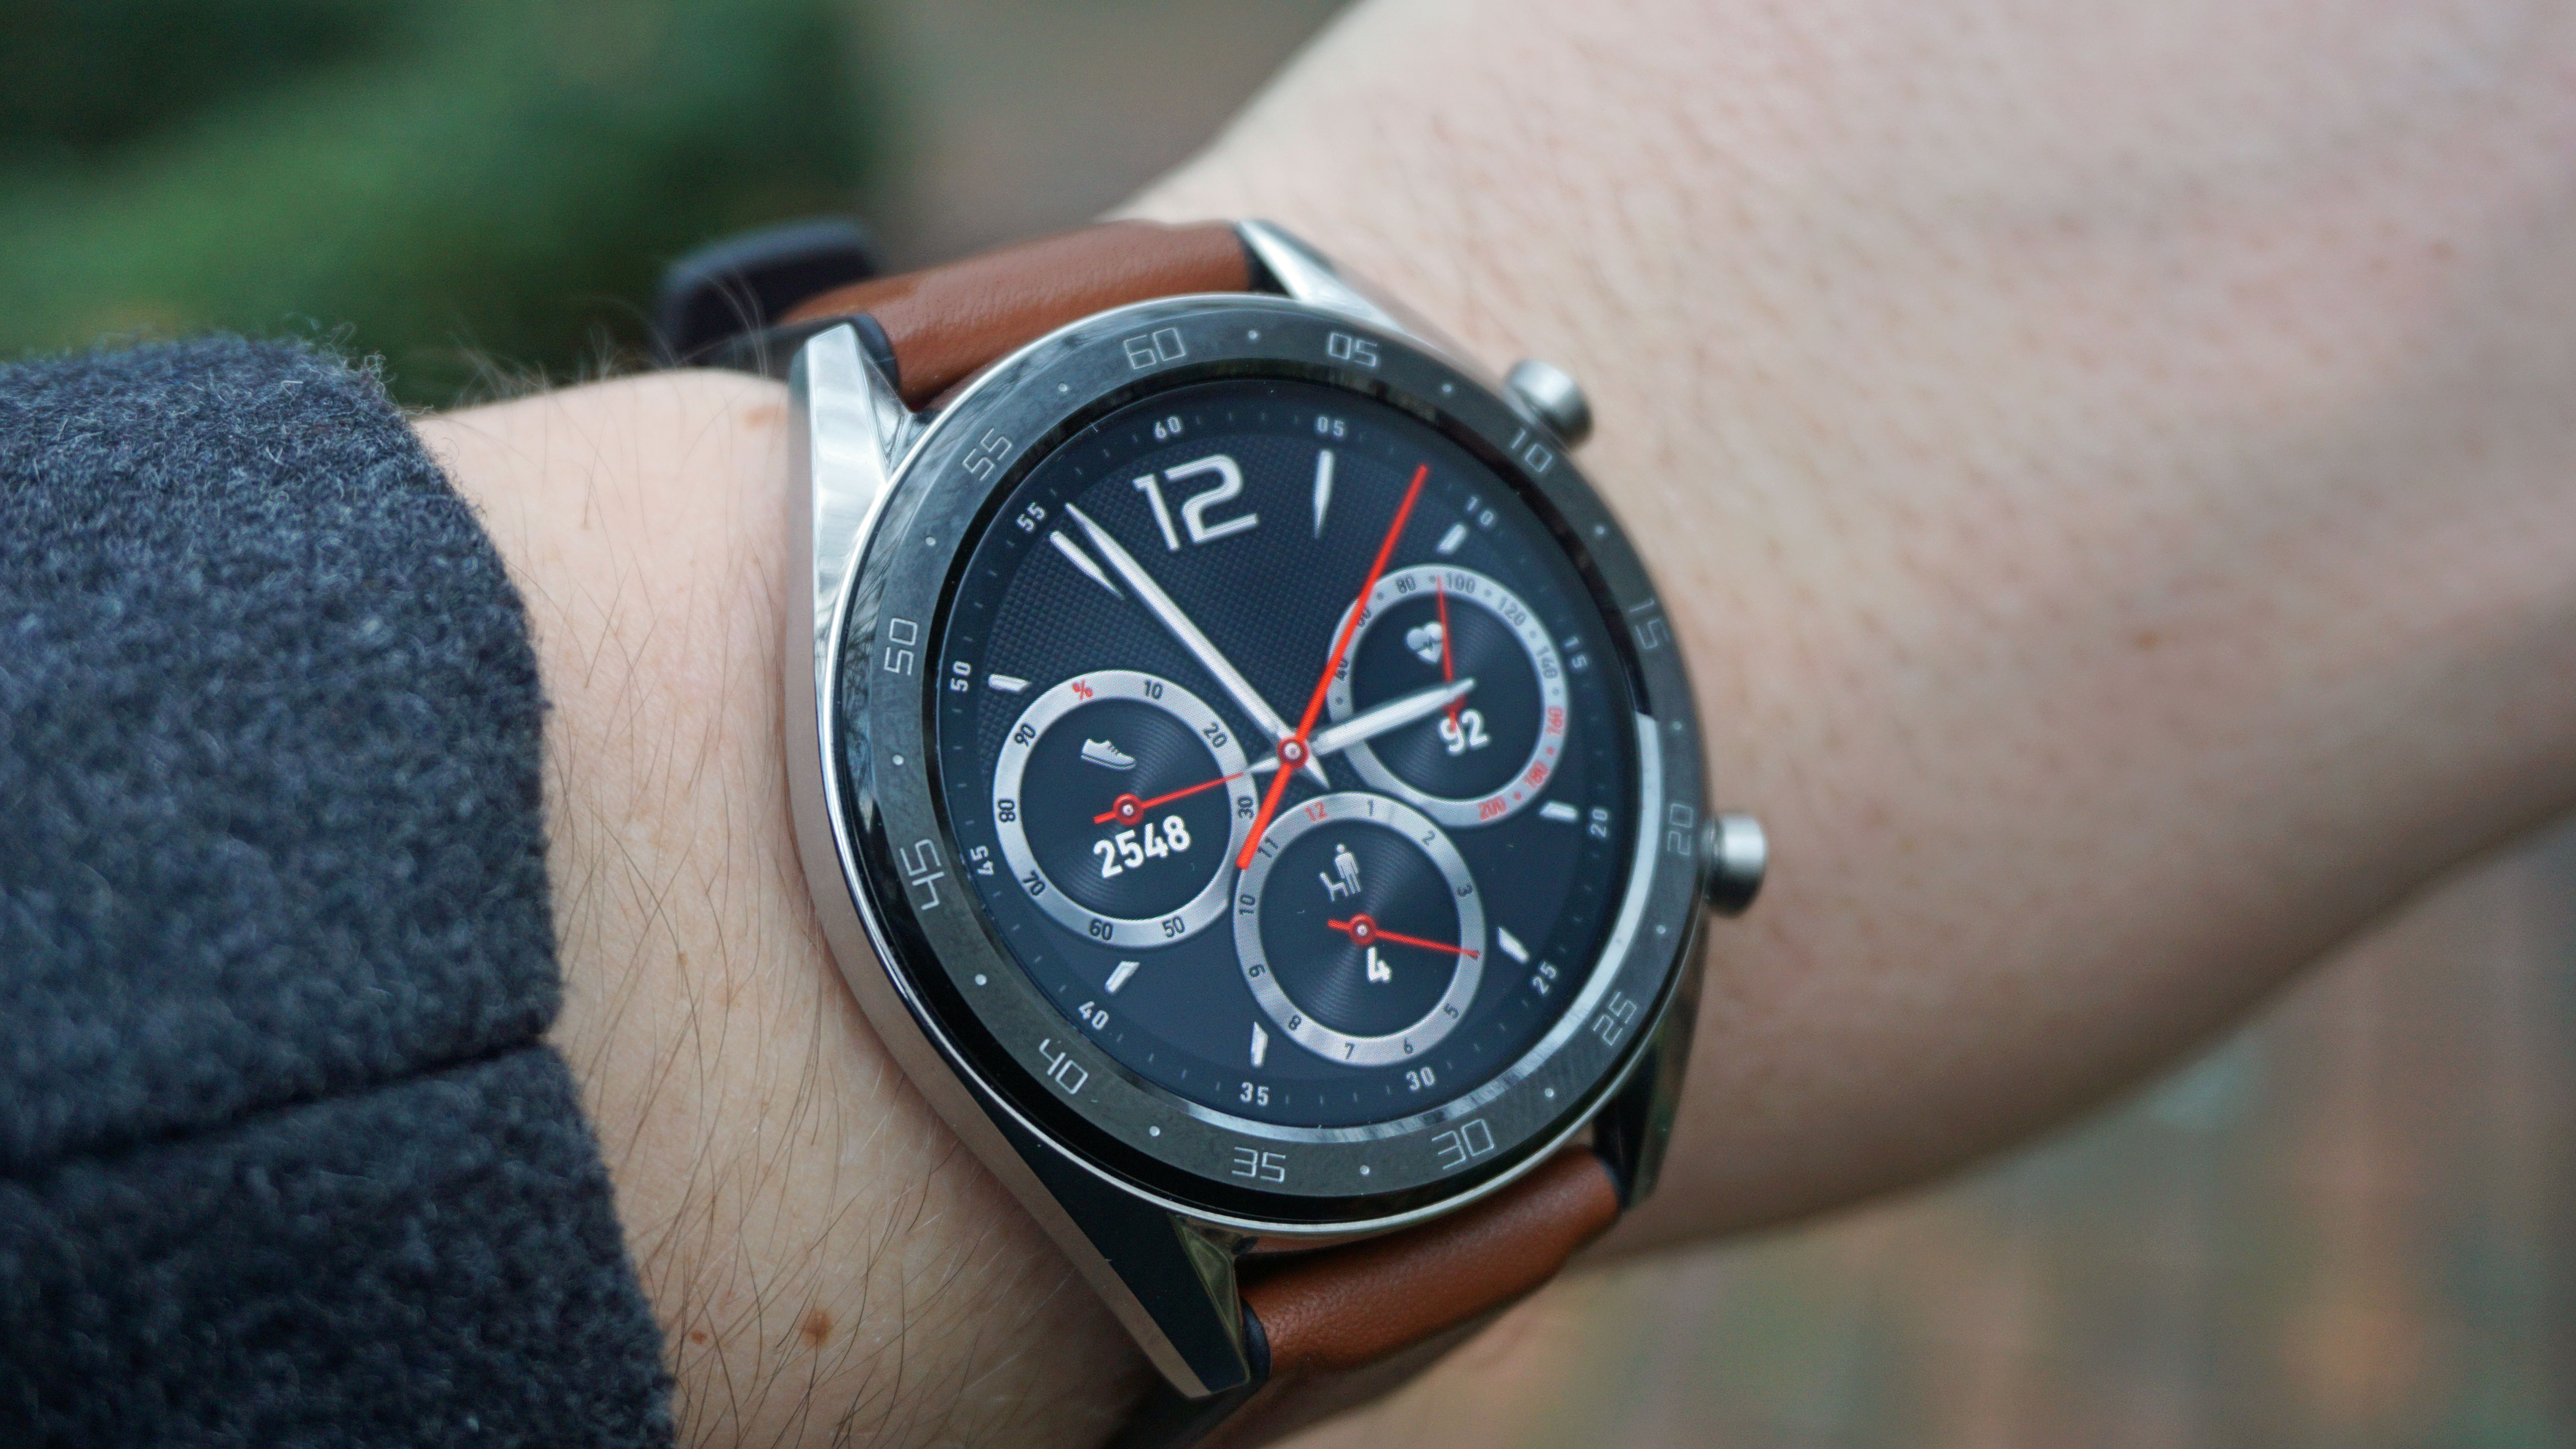 Huawei Watch Gt 2 Leaked Images Show Off New Slim Design Techradar